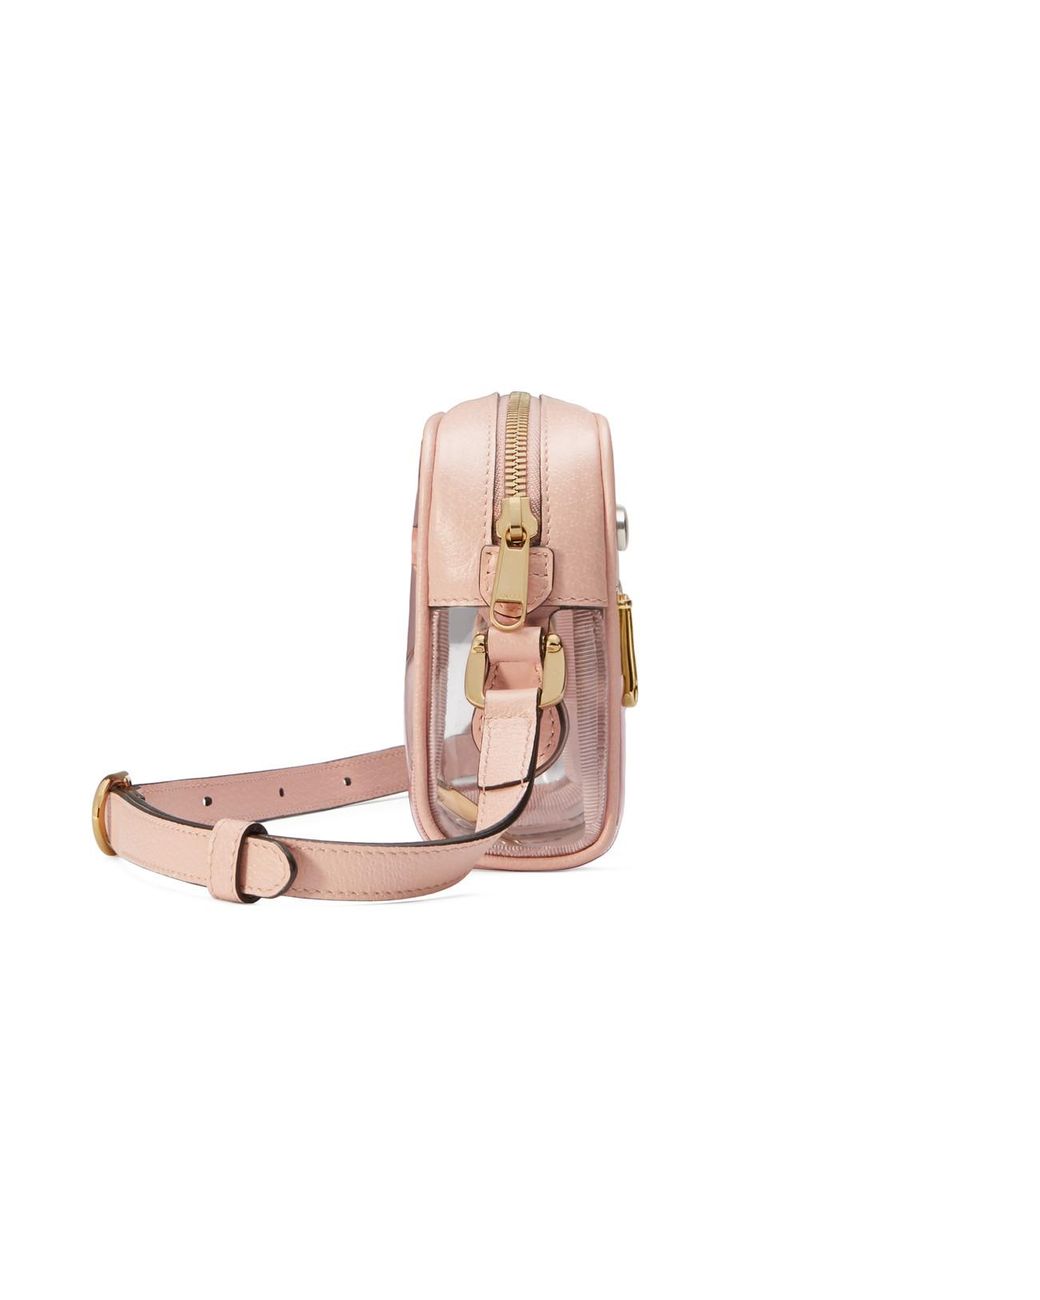 A Sneak Peek At The Gucci Ophidia Transparent Mini Bag — CNK Daily  (ChicksNKicks)